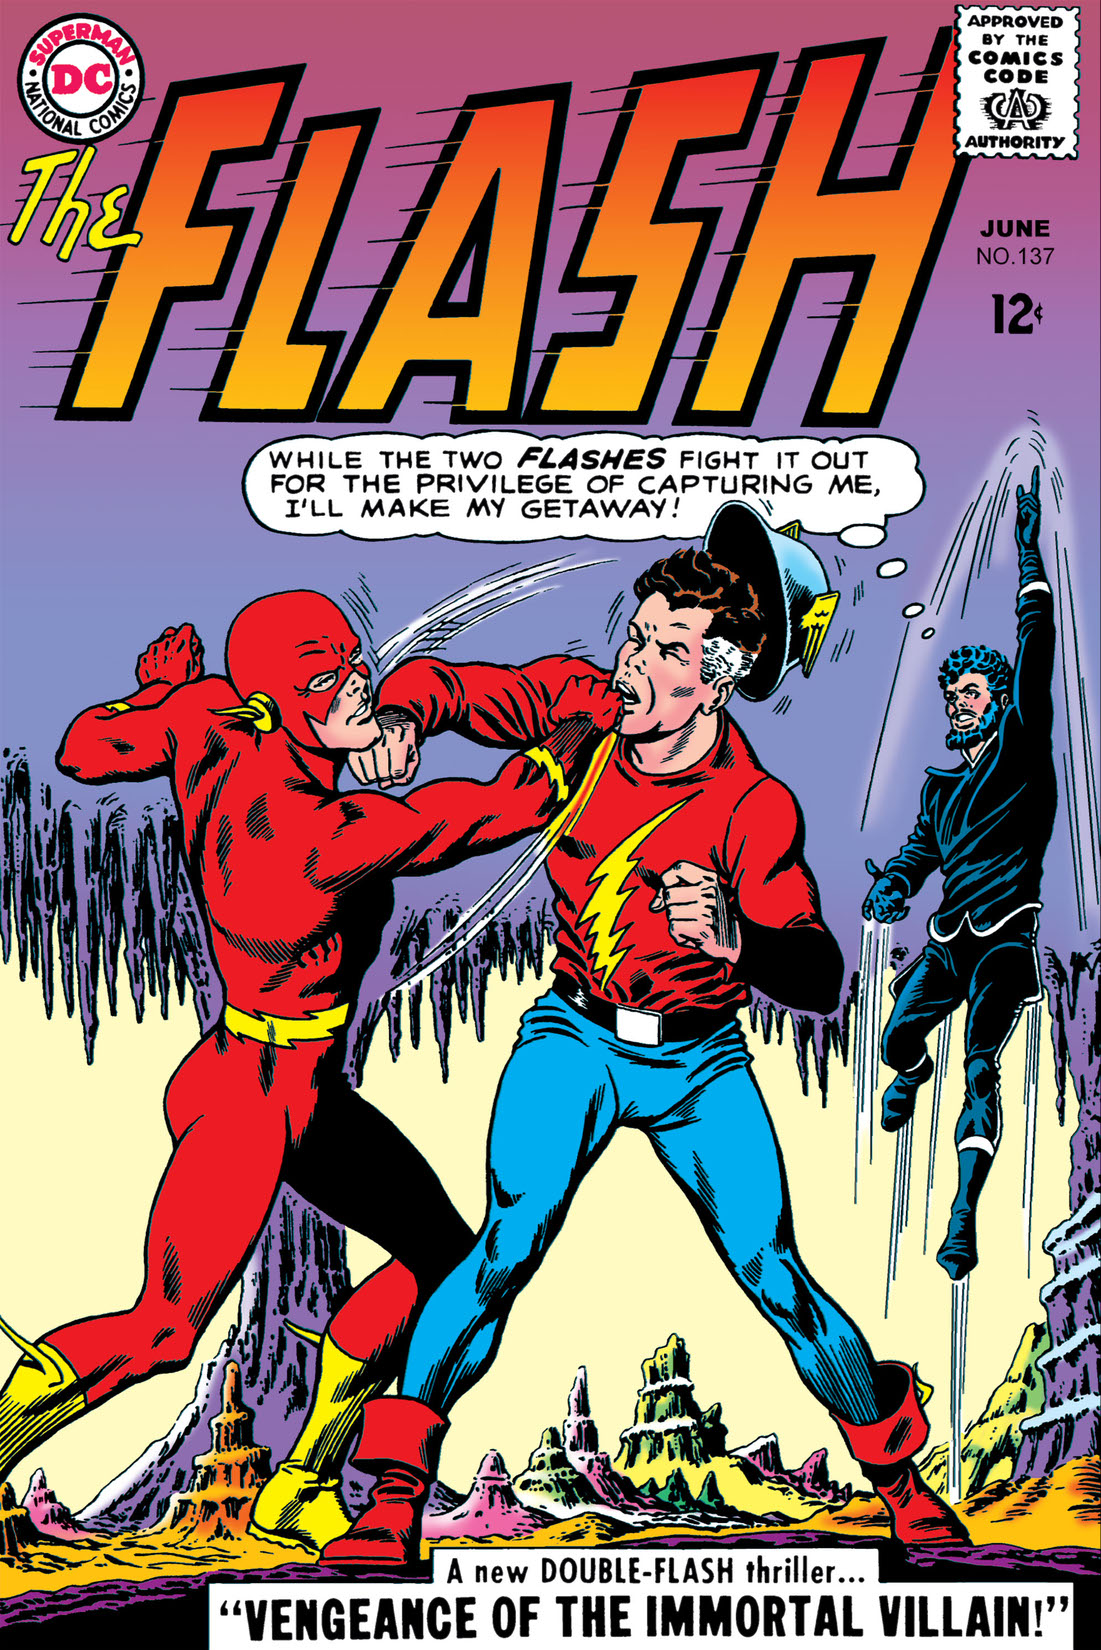 The Flash (1959-) #137 preview images